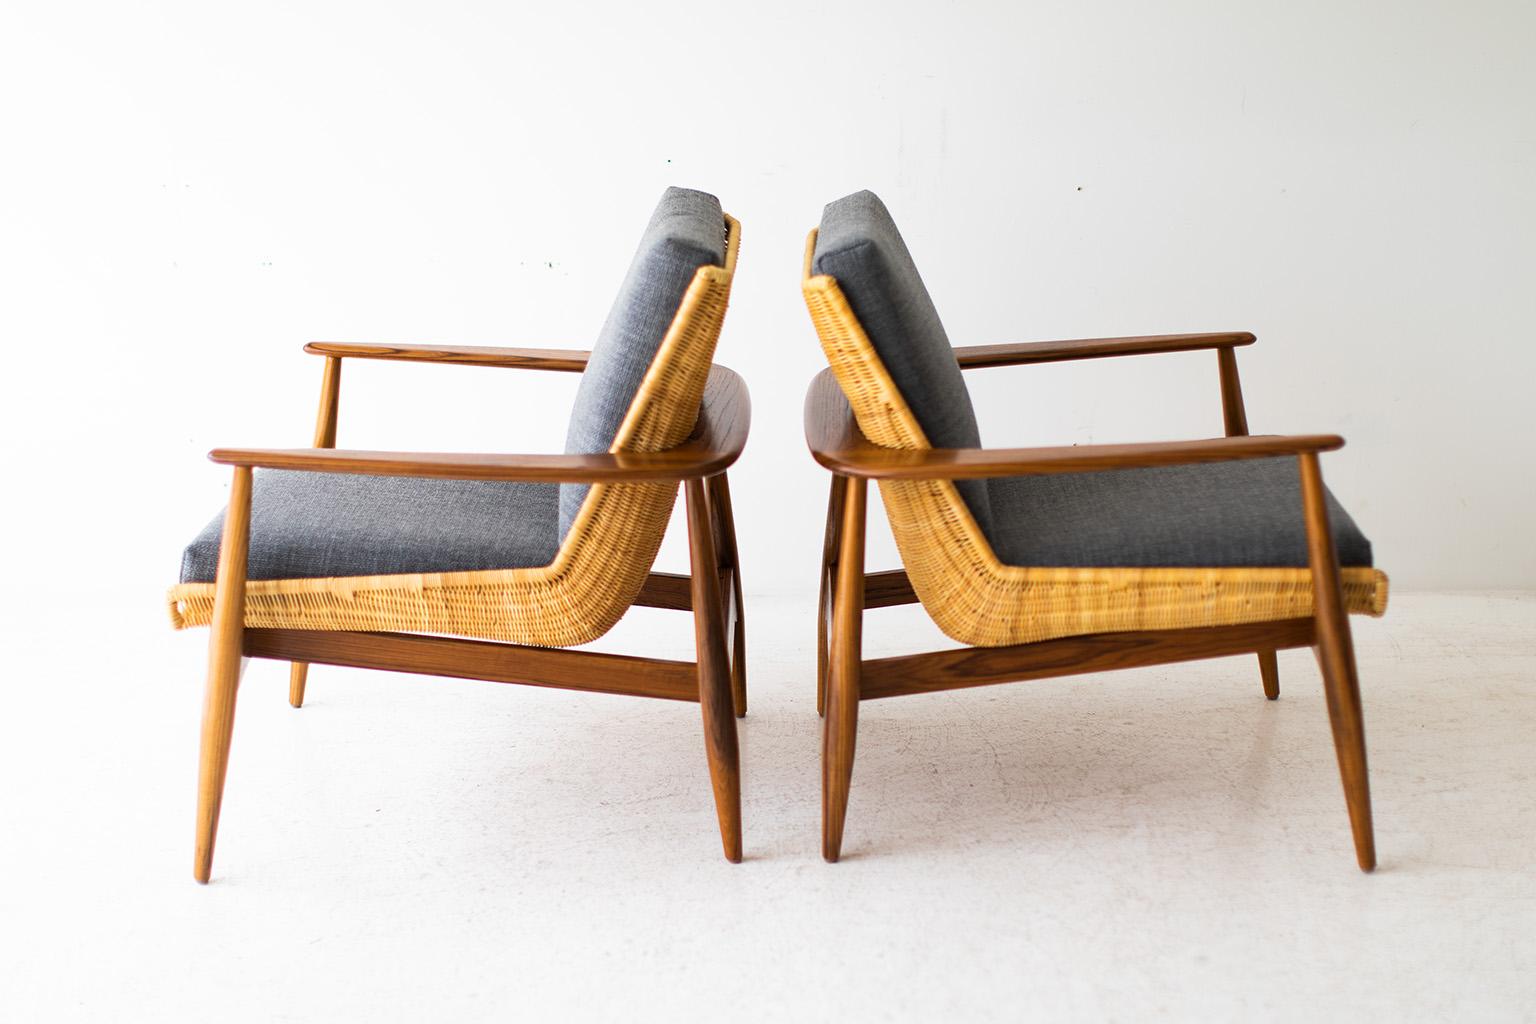 American Peabody Wicker Chairs, Modern Wicker Chairs, Teak and Thick Weave  For Sale